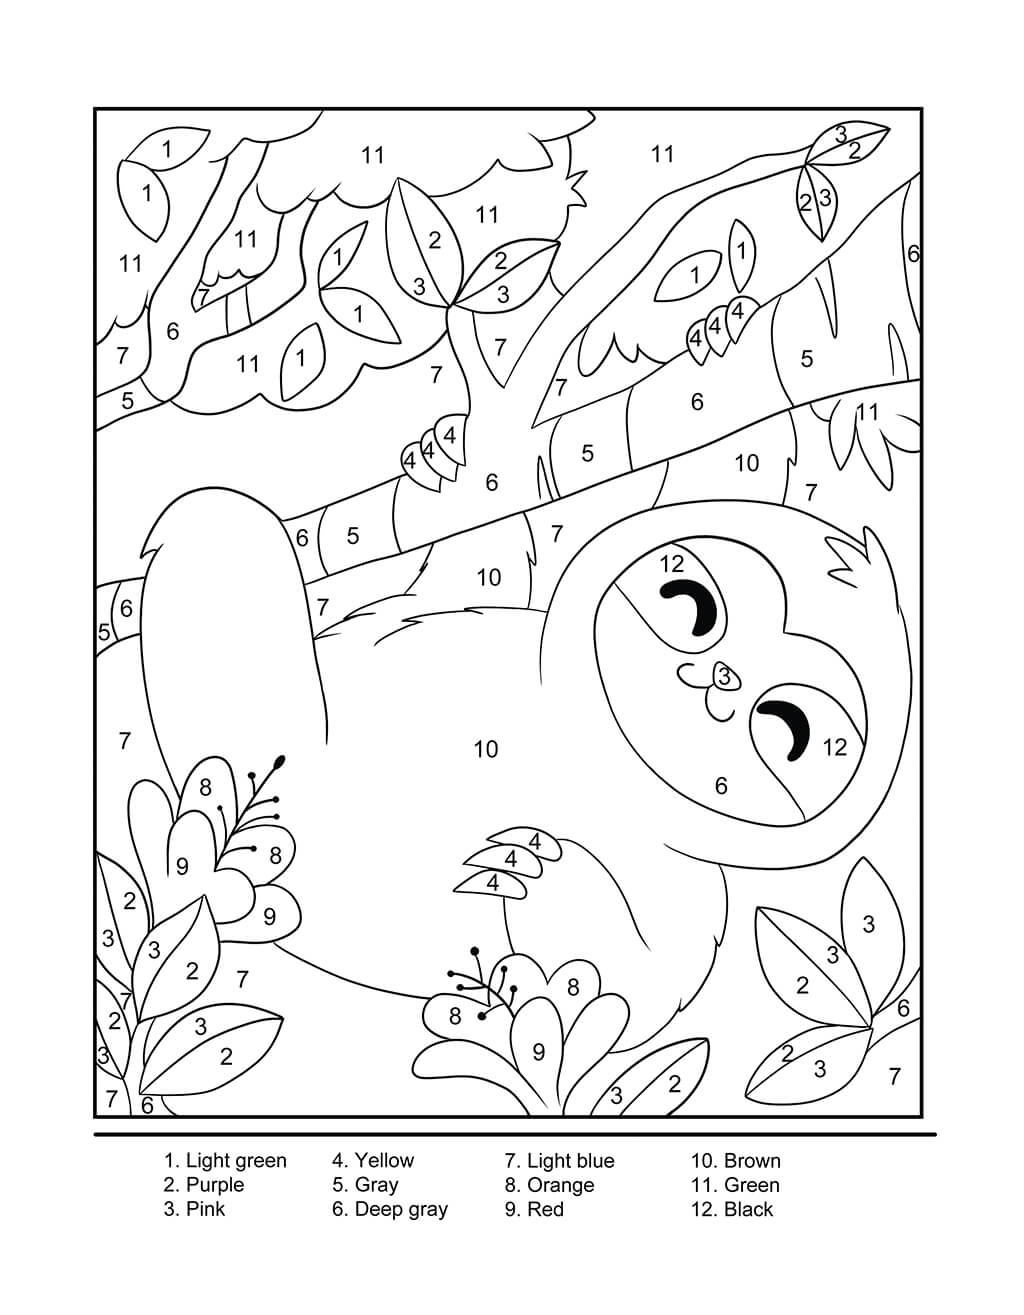 Activity Book for Kids Ages 6-8 (Spiral Edition)